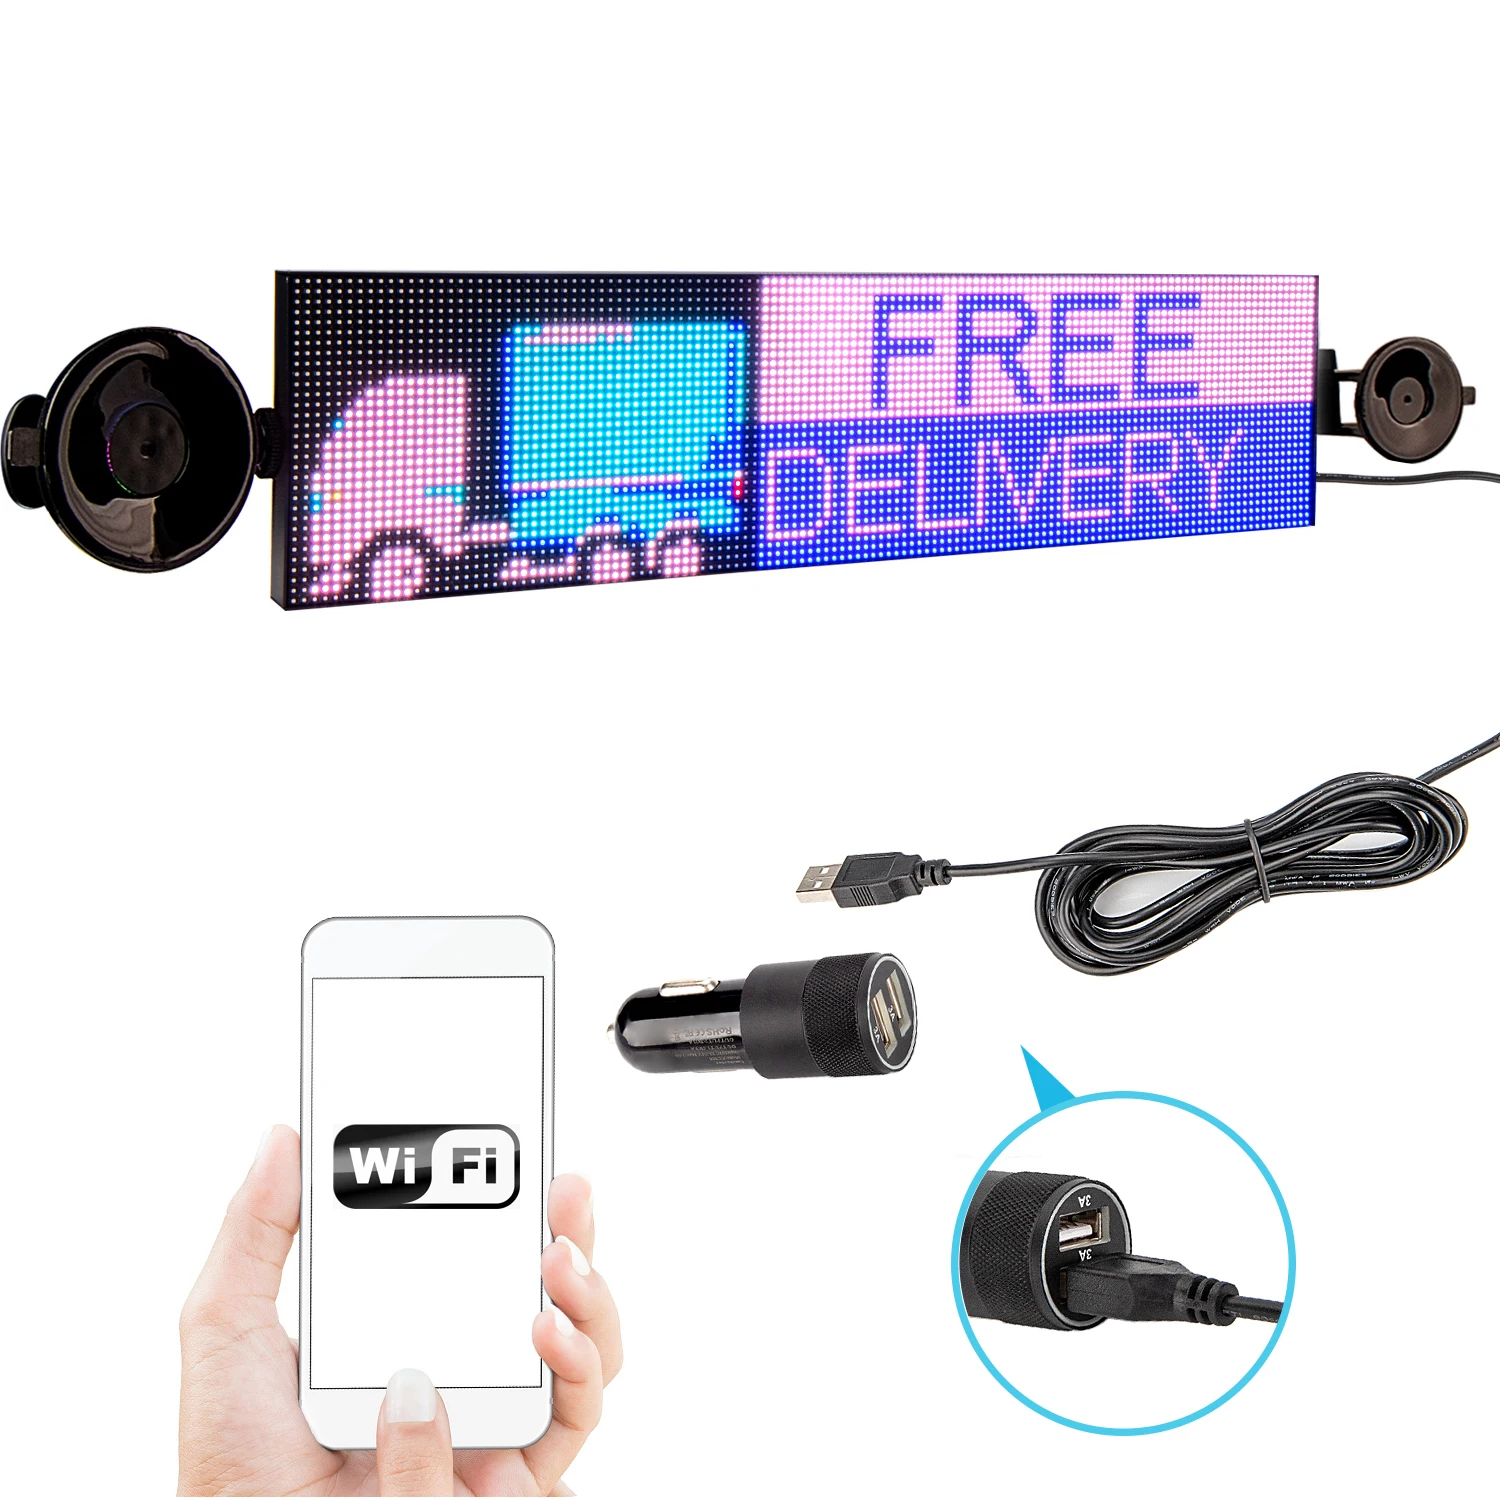 WiFi LED Sign RGB Full Color Led Advertising Display Programmable Scrolling Text Led Board for Business Store Car Window P4 52cm